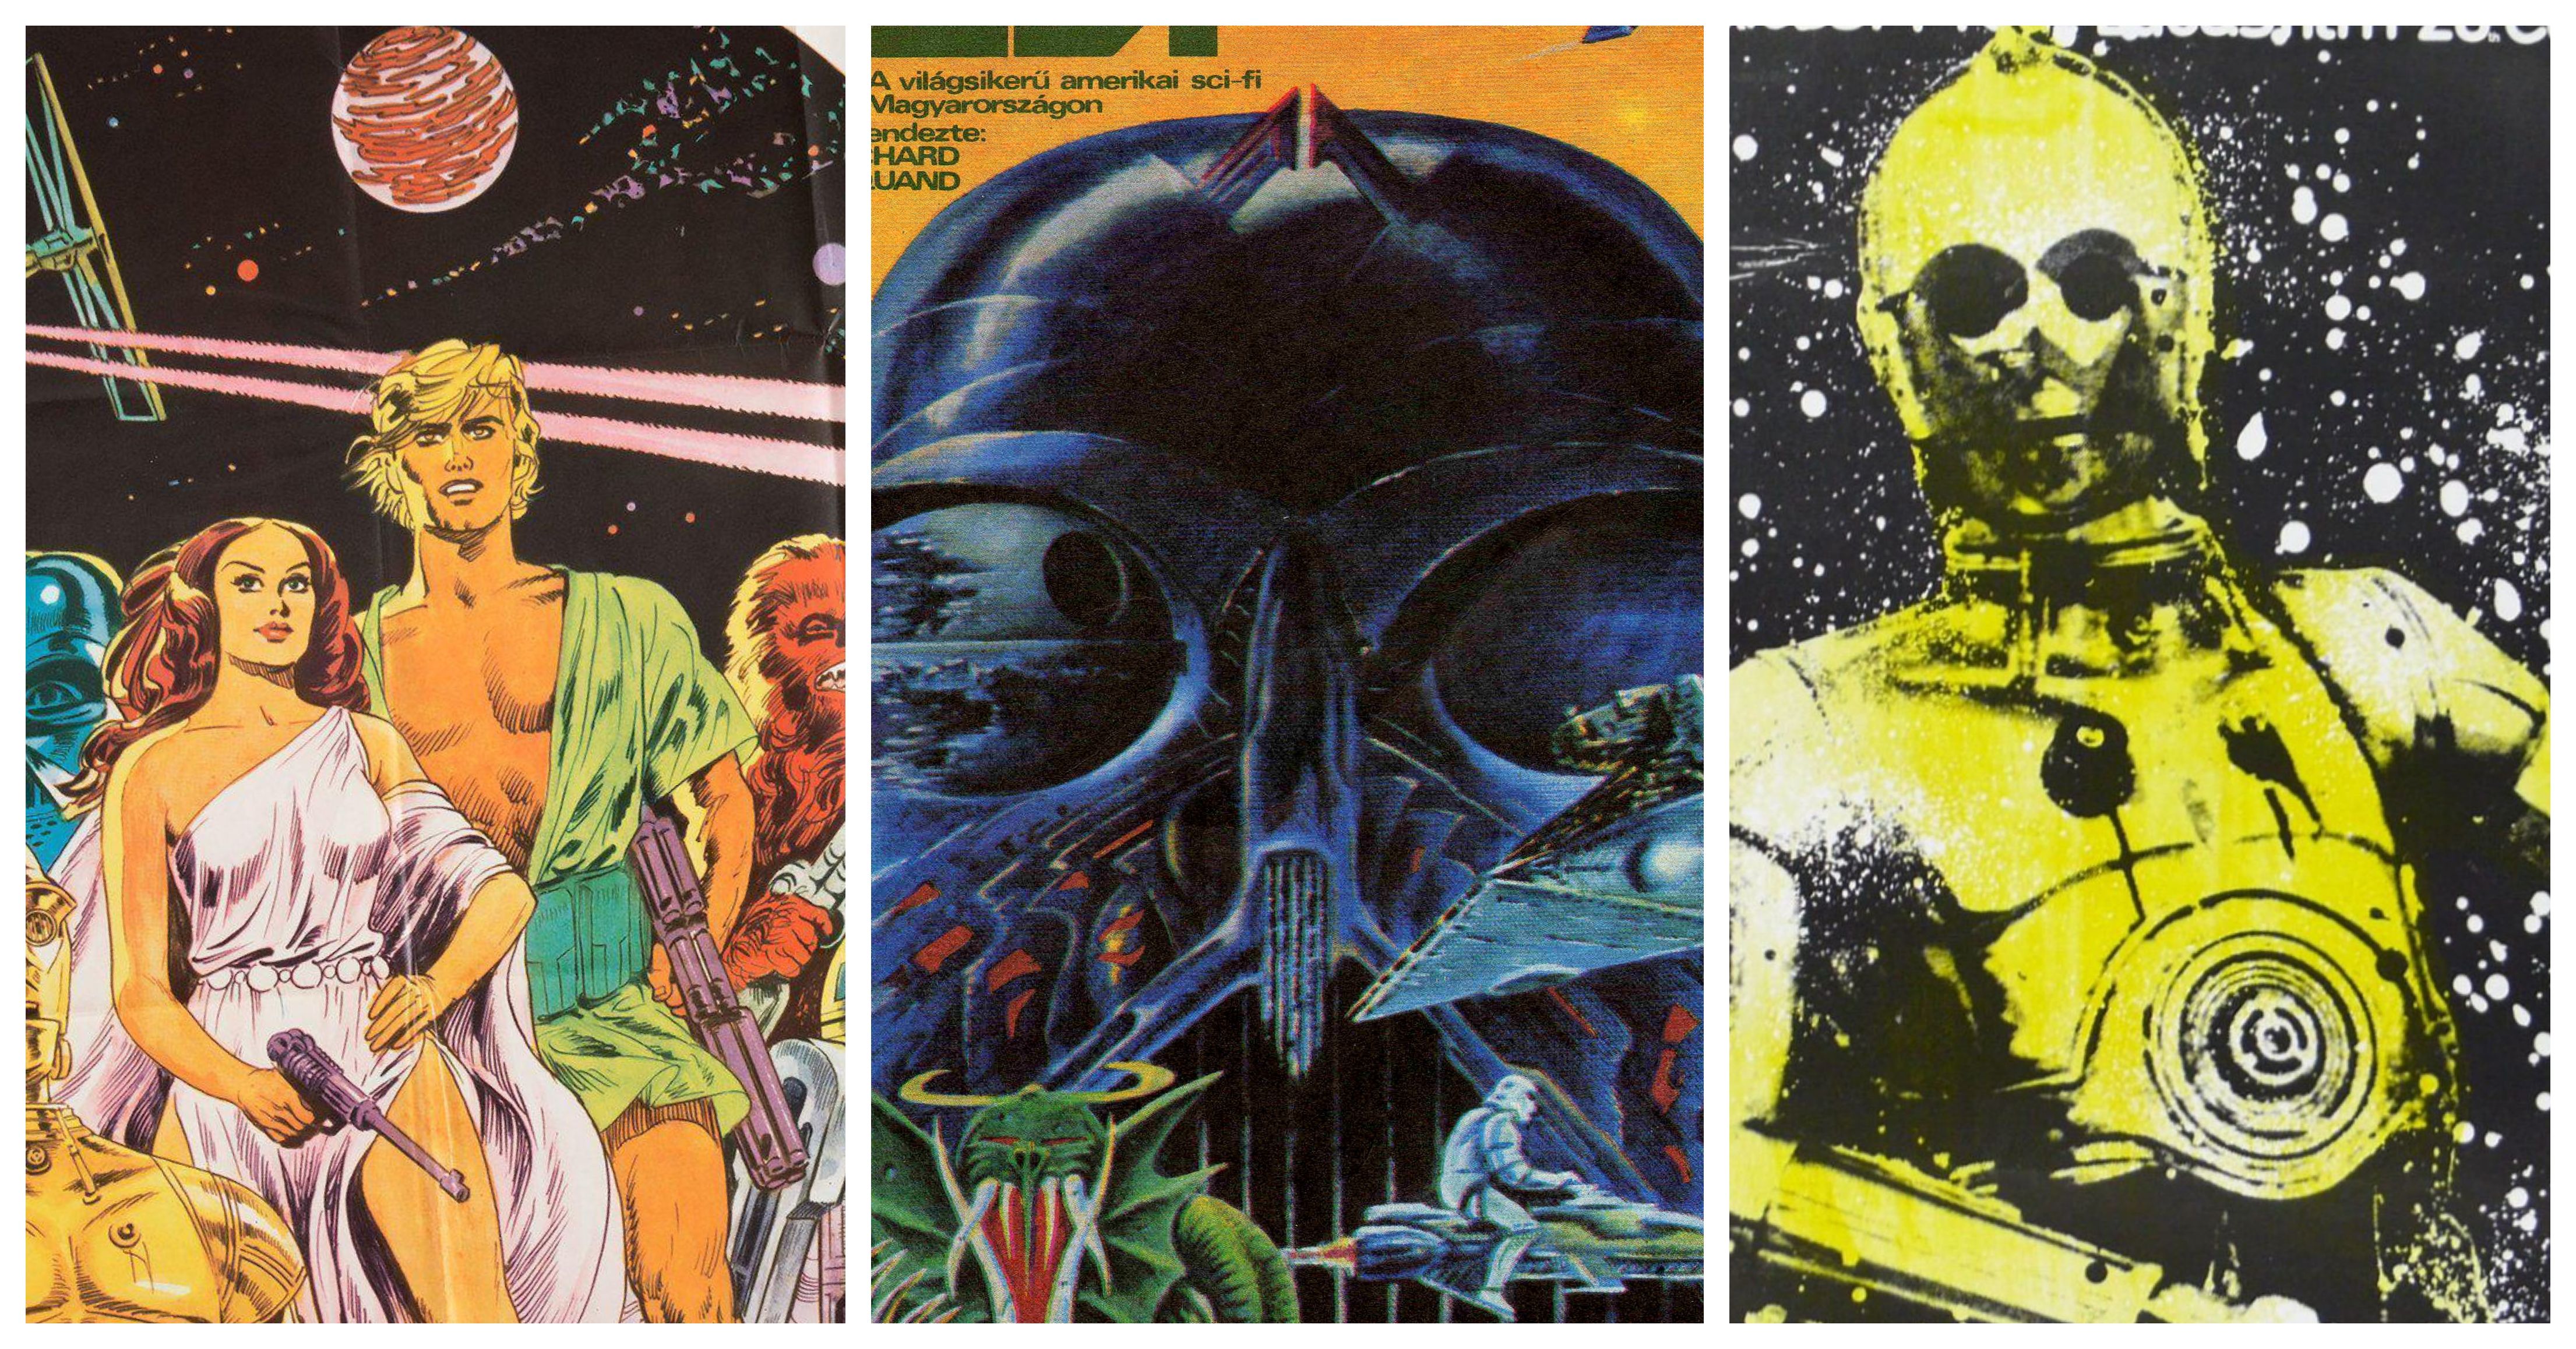 23 Awesome International Star Wars Posters From Around the World